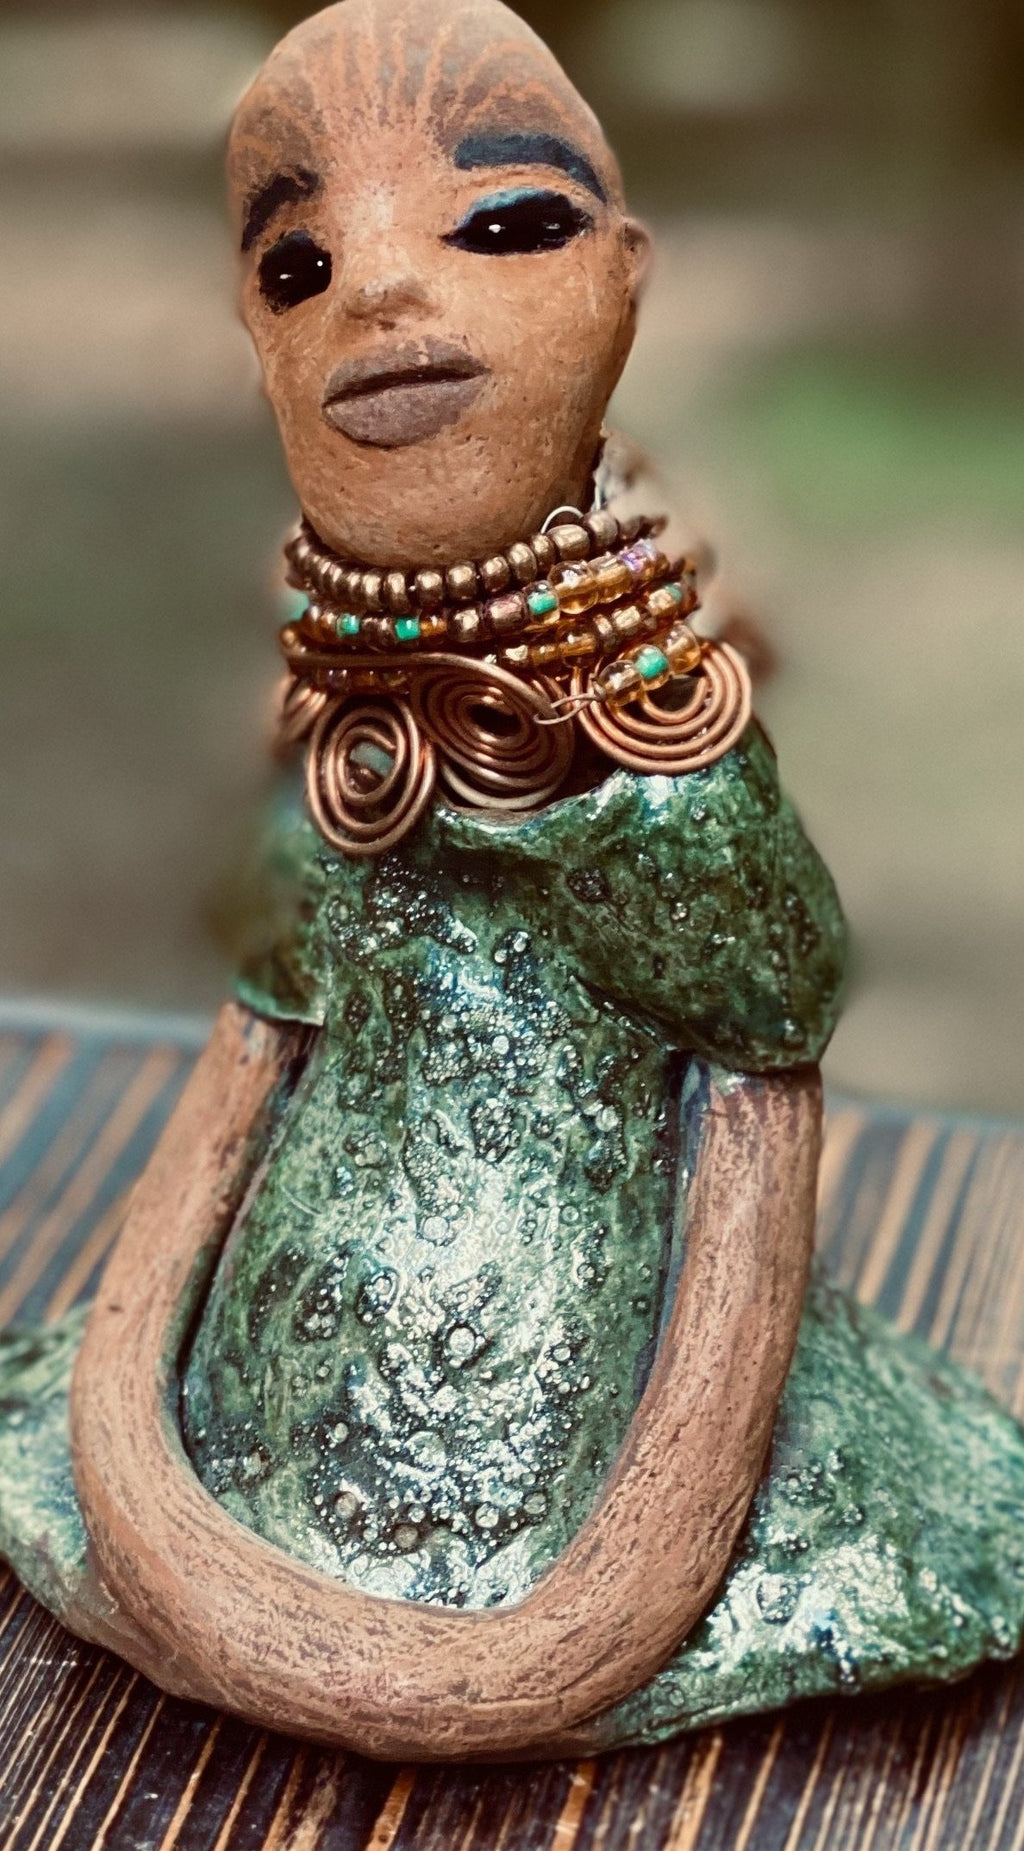 Meet Faye! Faye stands 7" x 5" x 4" and weighs 2.3 lbs. She has a lovely two tone honey brown complexion with  chocolate brown lips. She has a braided hairstyle.  Faye has a colorful metallic green antique glazed dress. She wears an awesome beaded collar with a copper spiral necklace. Her long loving arms rest at her side. With eyes wide opened, Faye has hopes of finding a new home.